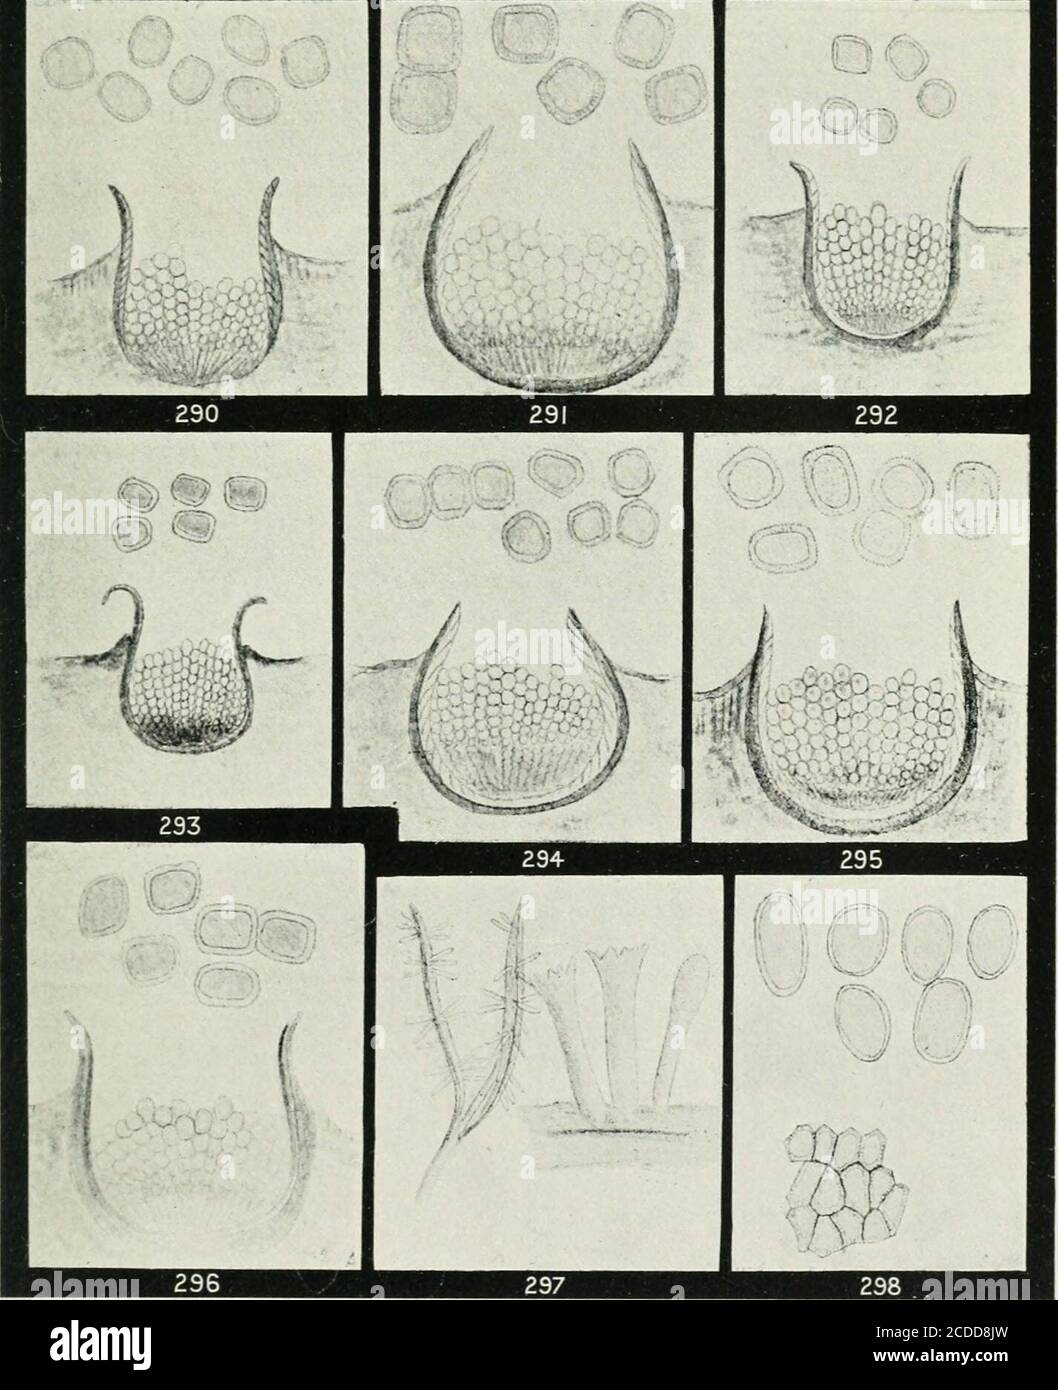 . The rusts of Australia, their structure, nature, and classification . C. JACKSONIAE ON GOMPHOLOBIUM LATIFOLIUM. 3i8 Explanation of Plates. PLATE XXXIX. (All aecidia X 50, and aecidiosfores X 300.) AECIDIUM.Fig. 2S7. A. veronicae on Veronica sp. 288. A. flantaginis-variae on Plan/ago varia. 2S9. A. lobeliae Thuem., on Lobelia fratioides, described in connexion with Pucciniaaucta. The free margin ruptures irregularly, and it is sometimes difficult todetect a peridial wall, so that it partakes of the nature of a Caeoma. 290. A. cymbonoti on Cymbonotus lawsonianus. 291. A. monocystis on Abrotane Stock Photo